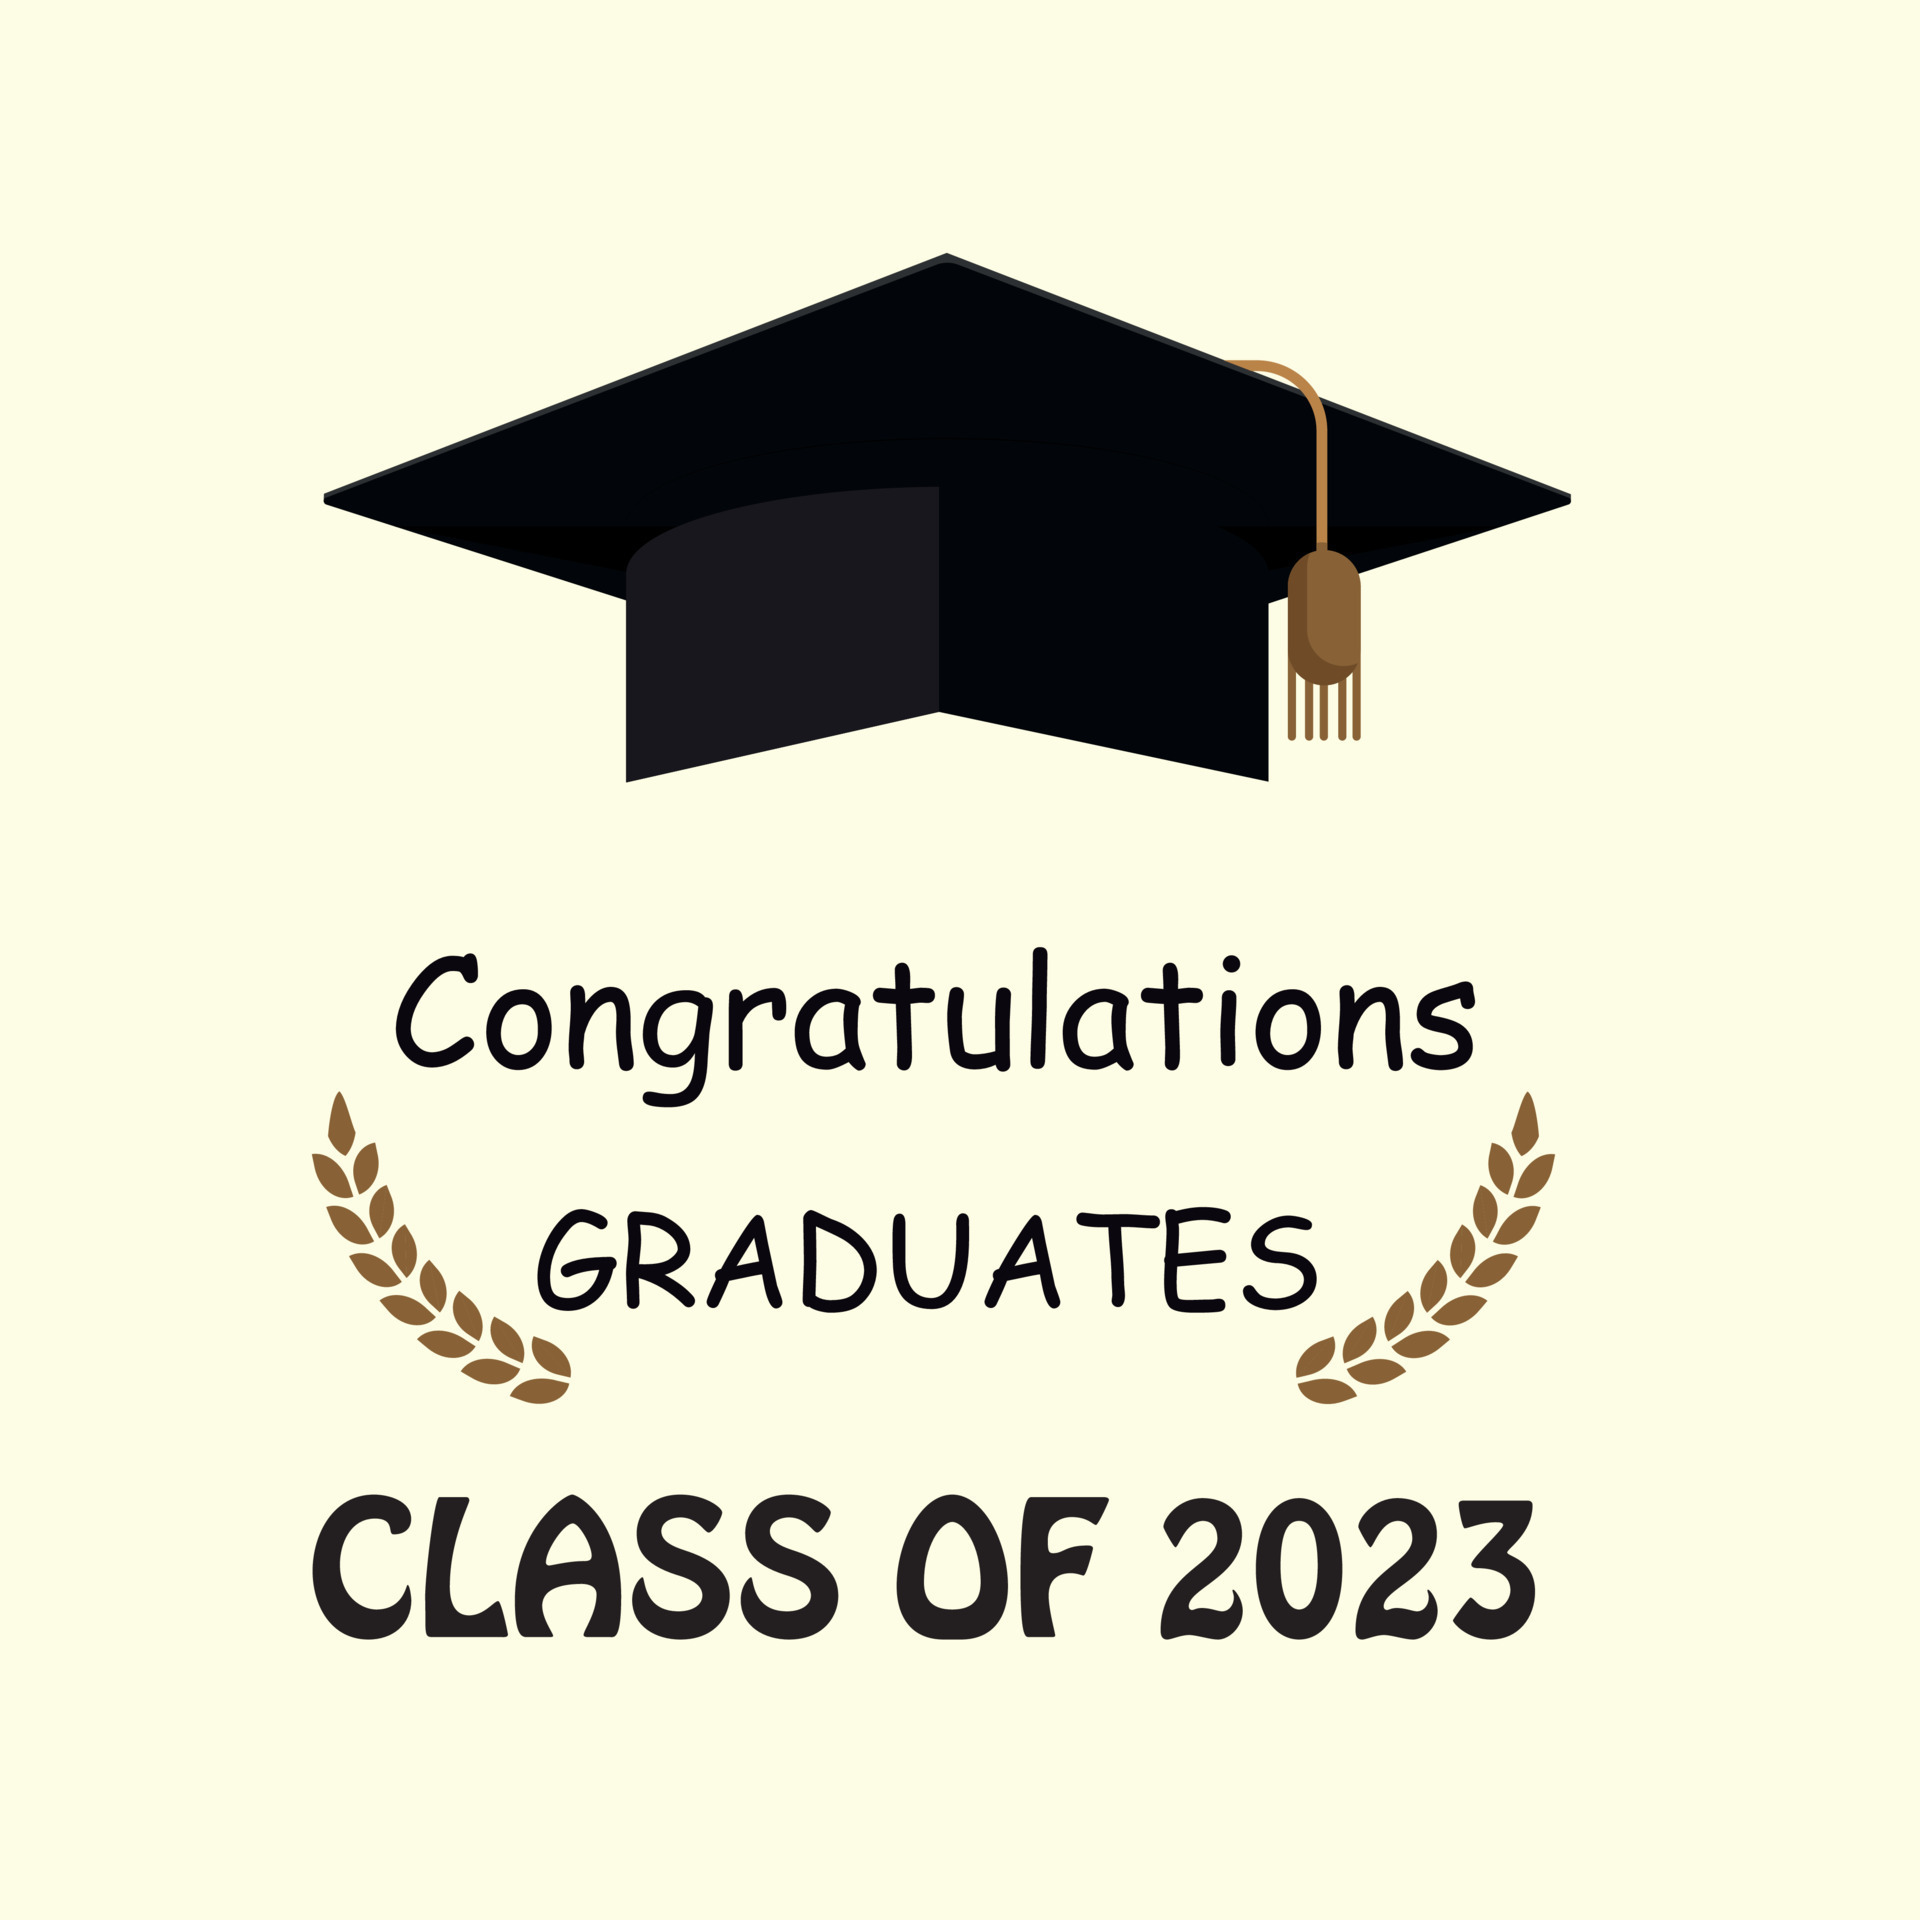 class-of-2023-black-and-gold-badge-design-template-congratulations